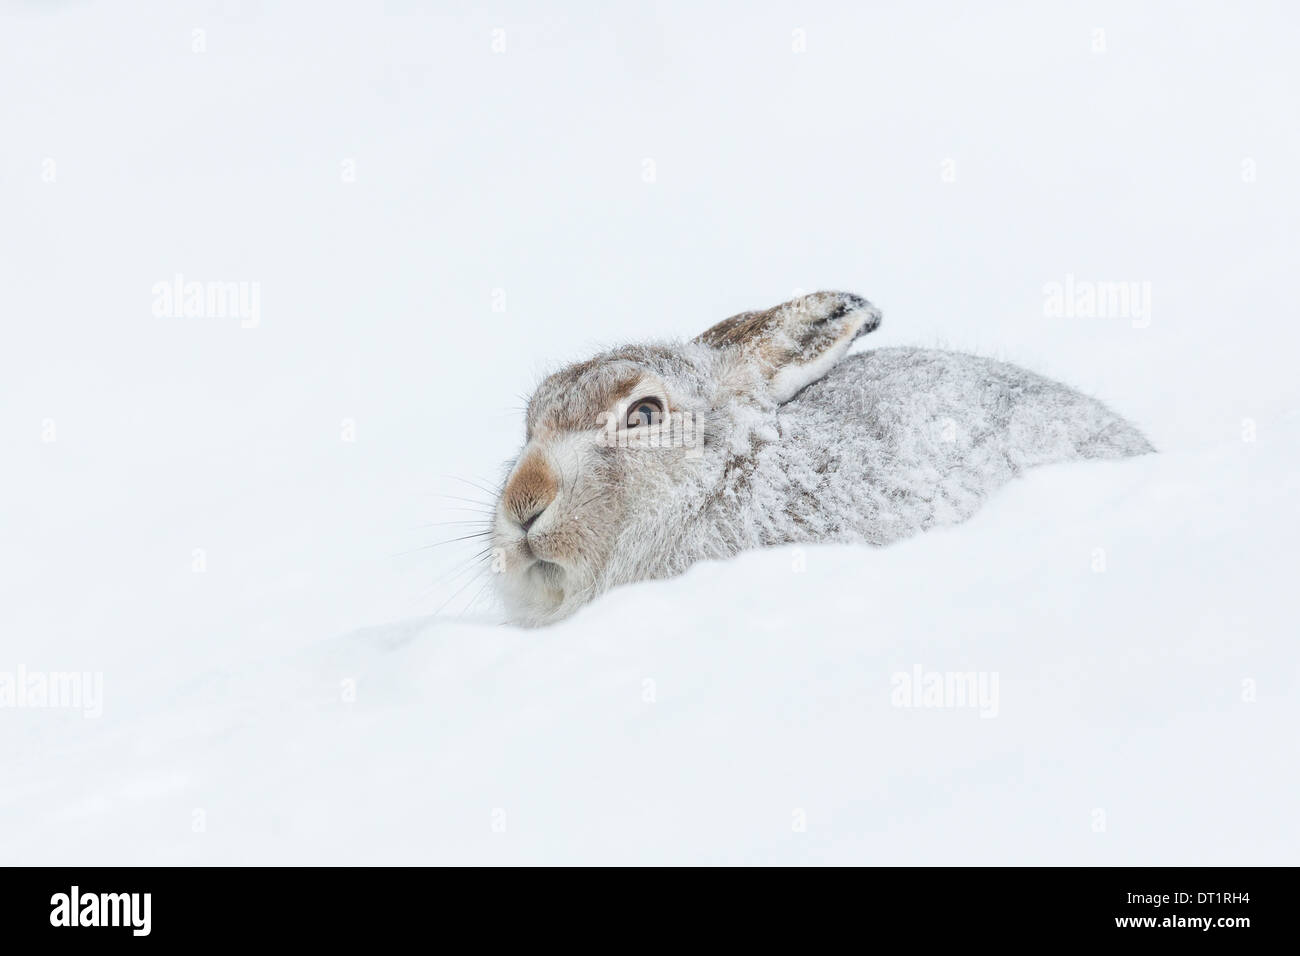 Scottish Mountain Hare (Lepus timidus) among snow in Scottish Highlands, Great Britain Stock Photo